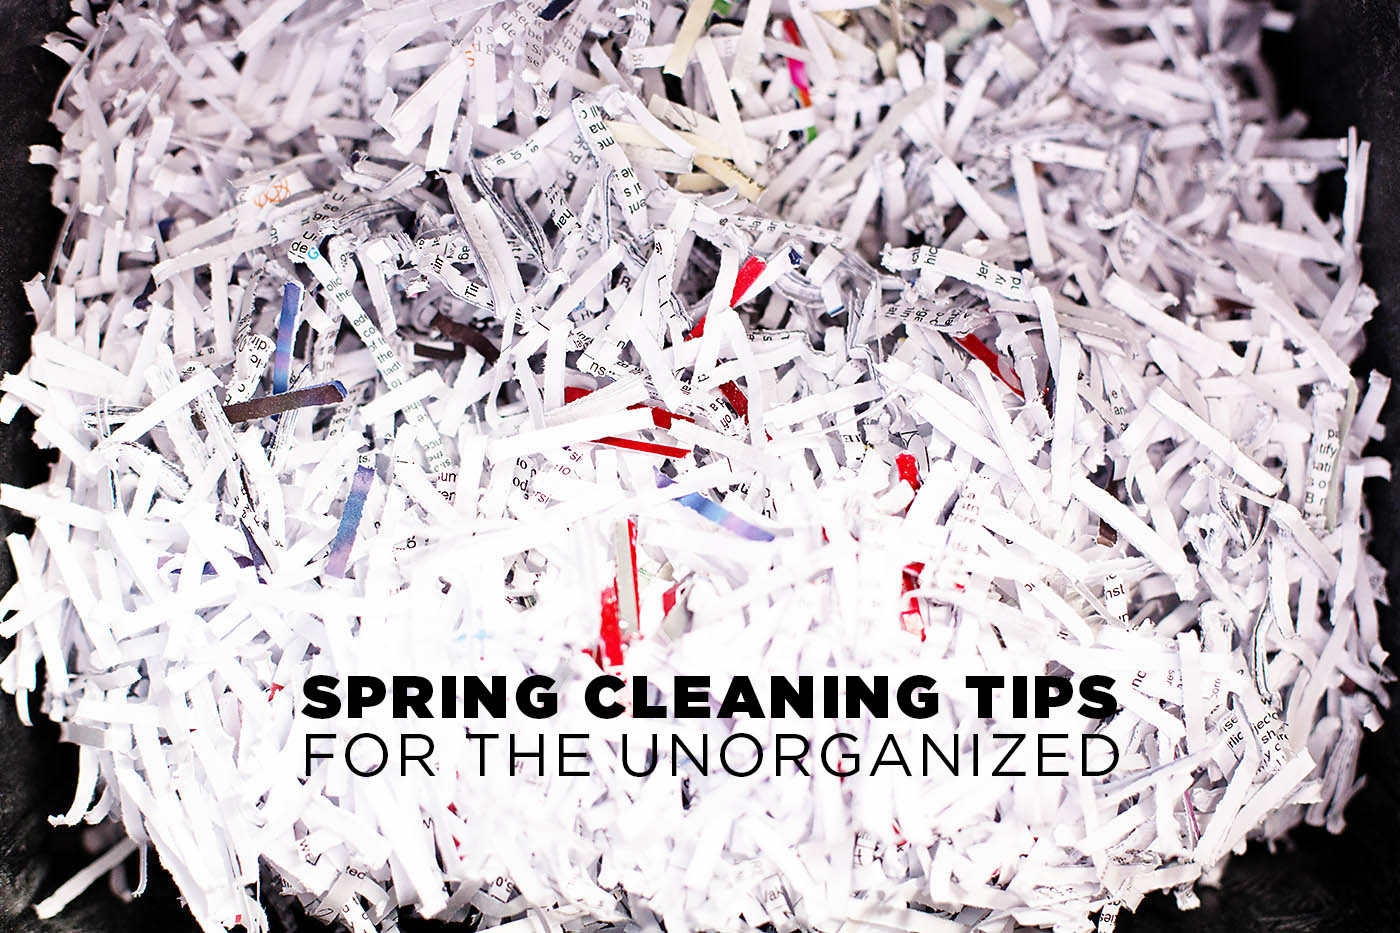 Spring Cleaning Tips for the Unorganized